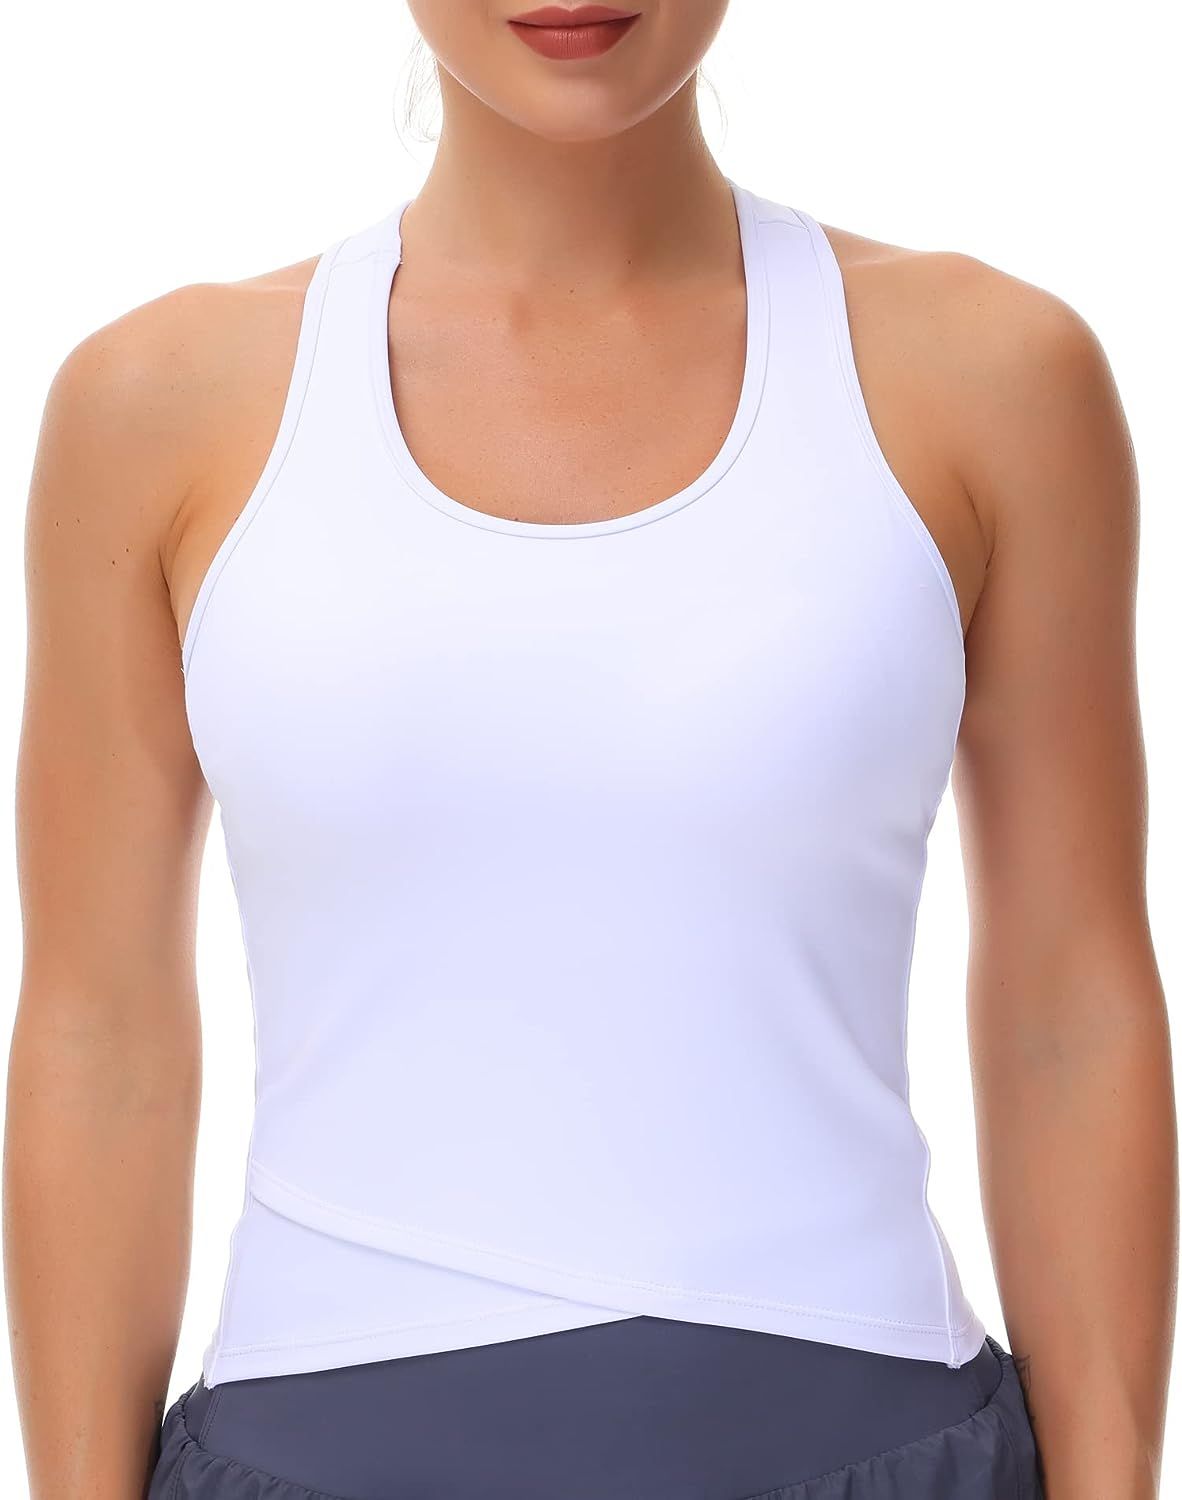 Women’s Racerback Workout Tank Tops with Built in Bra Sleeveless Running Yoga Shirts Slim Fit | Amazon (US)